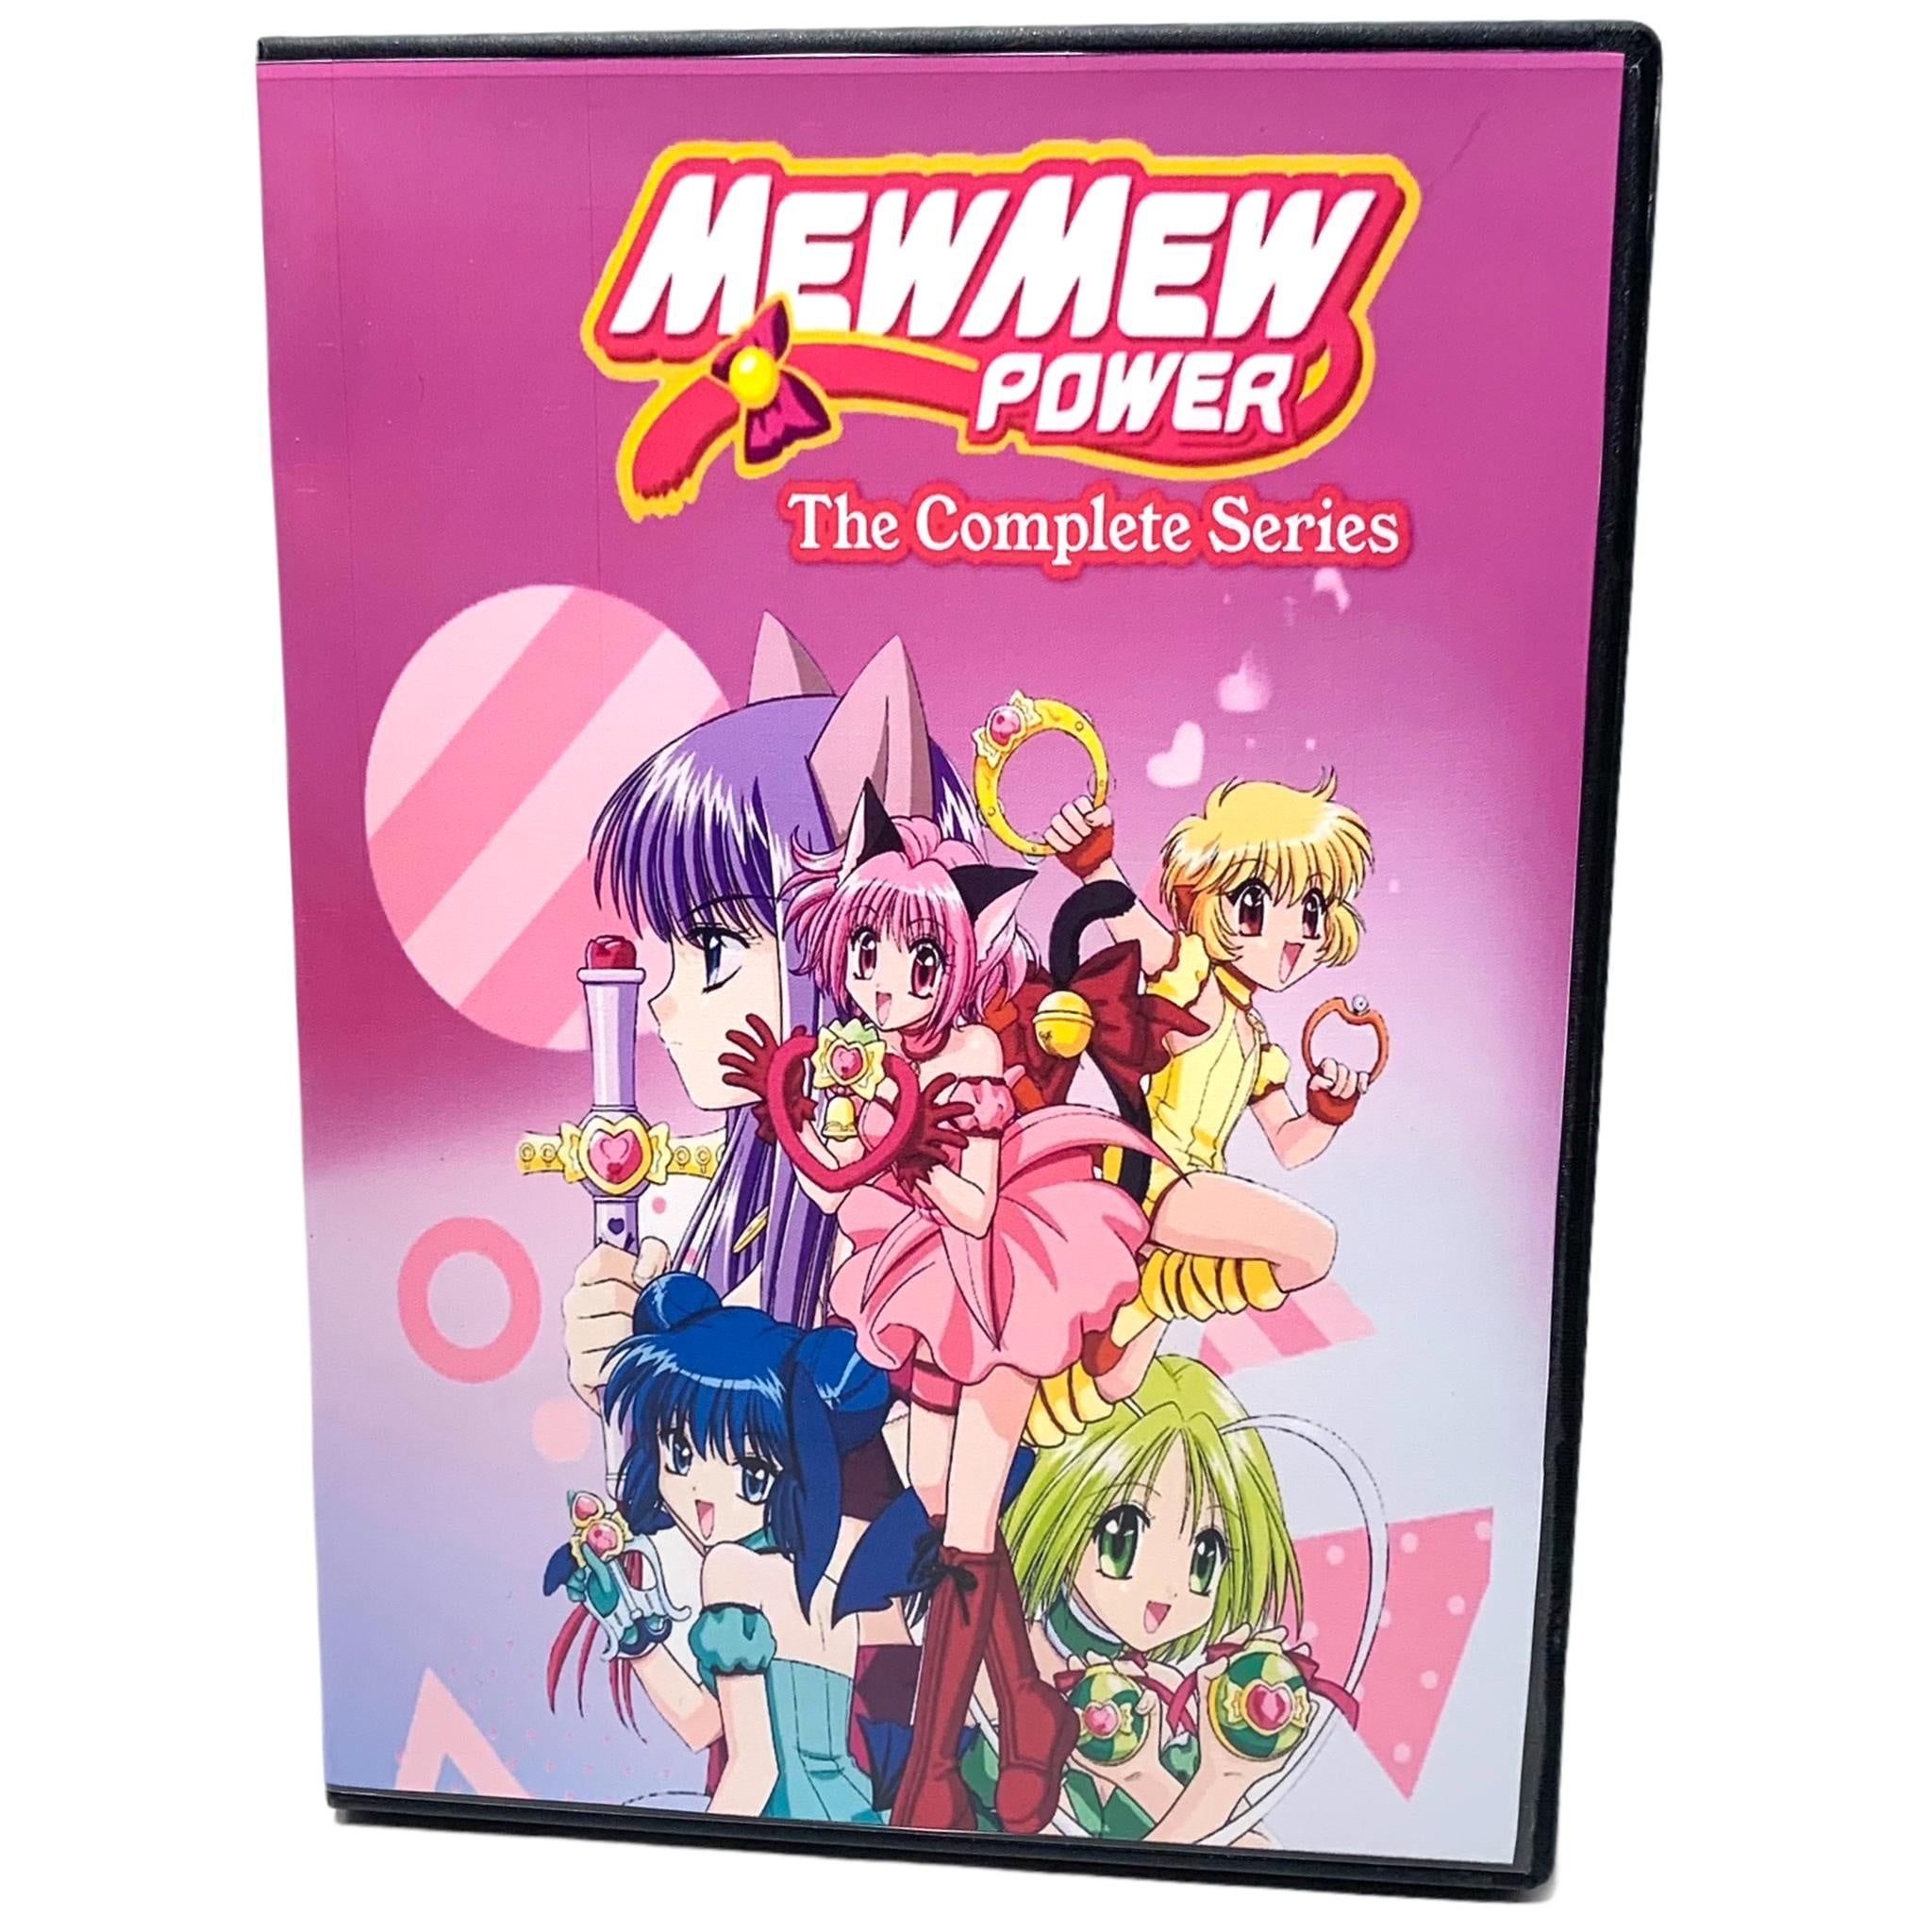 Power: The Complete Series